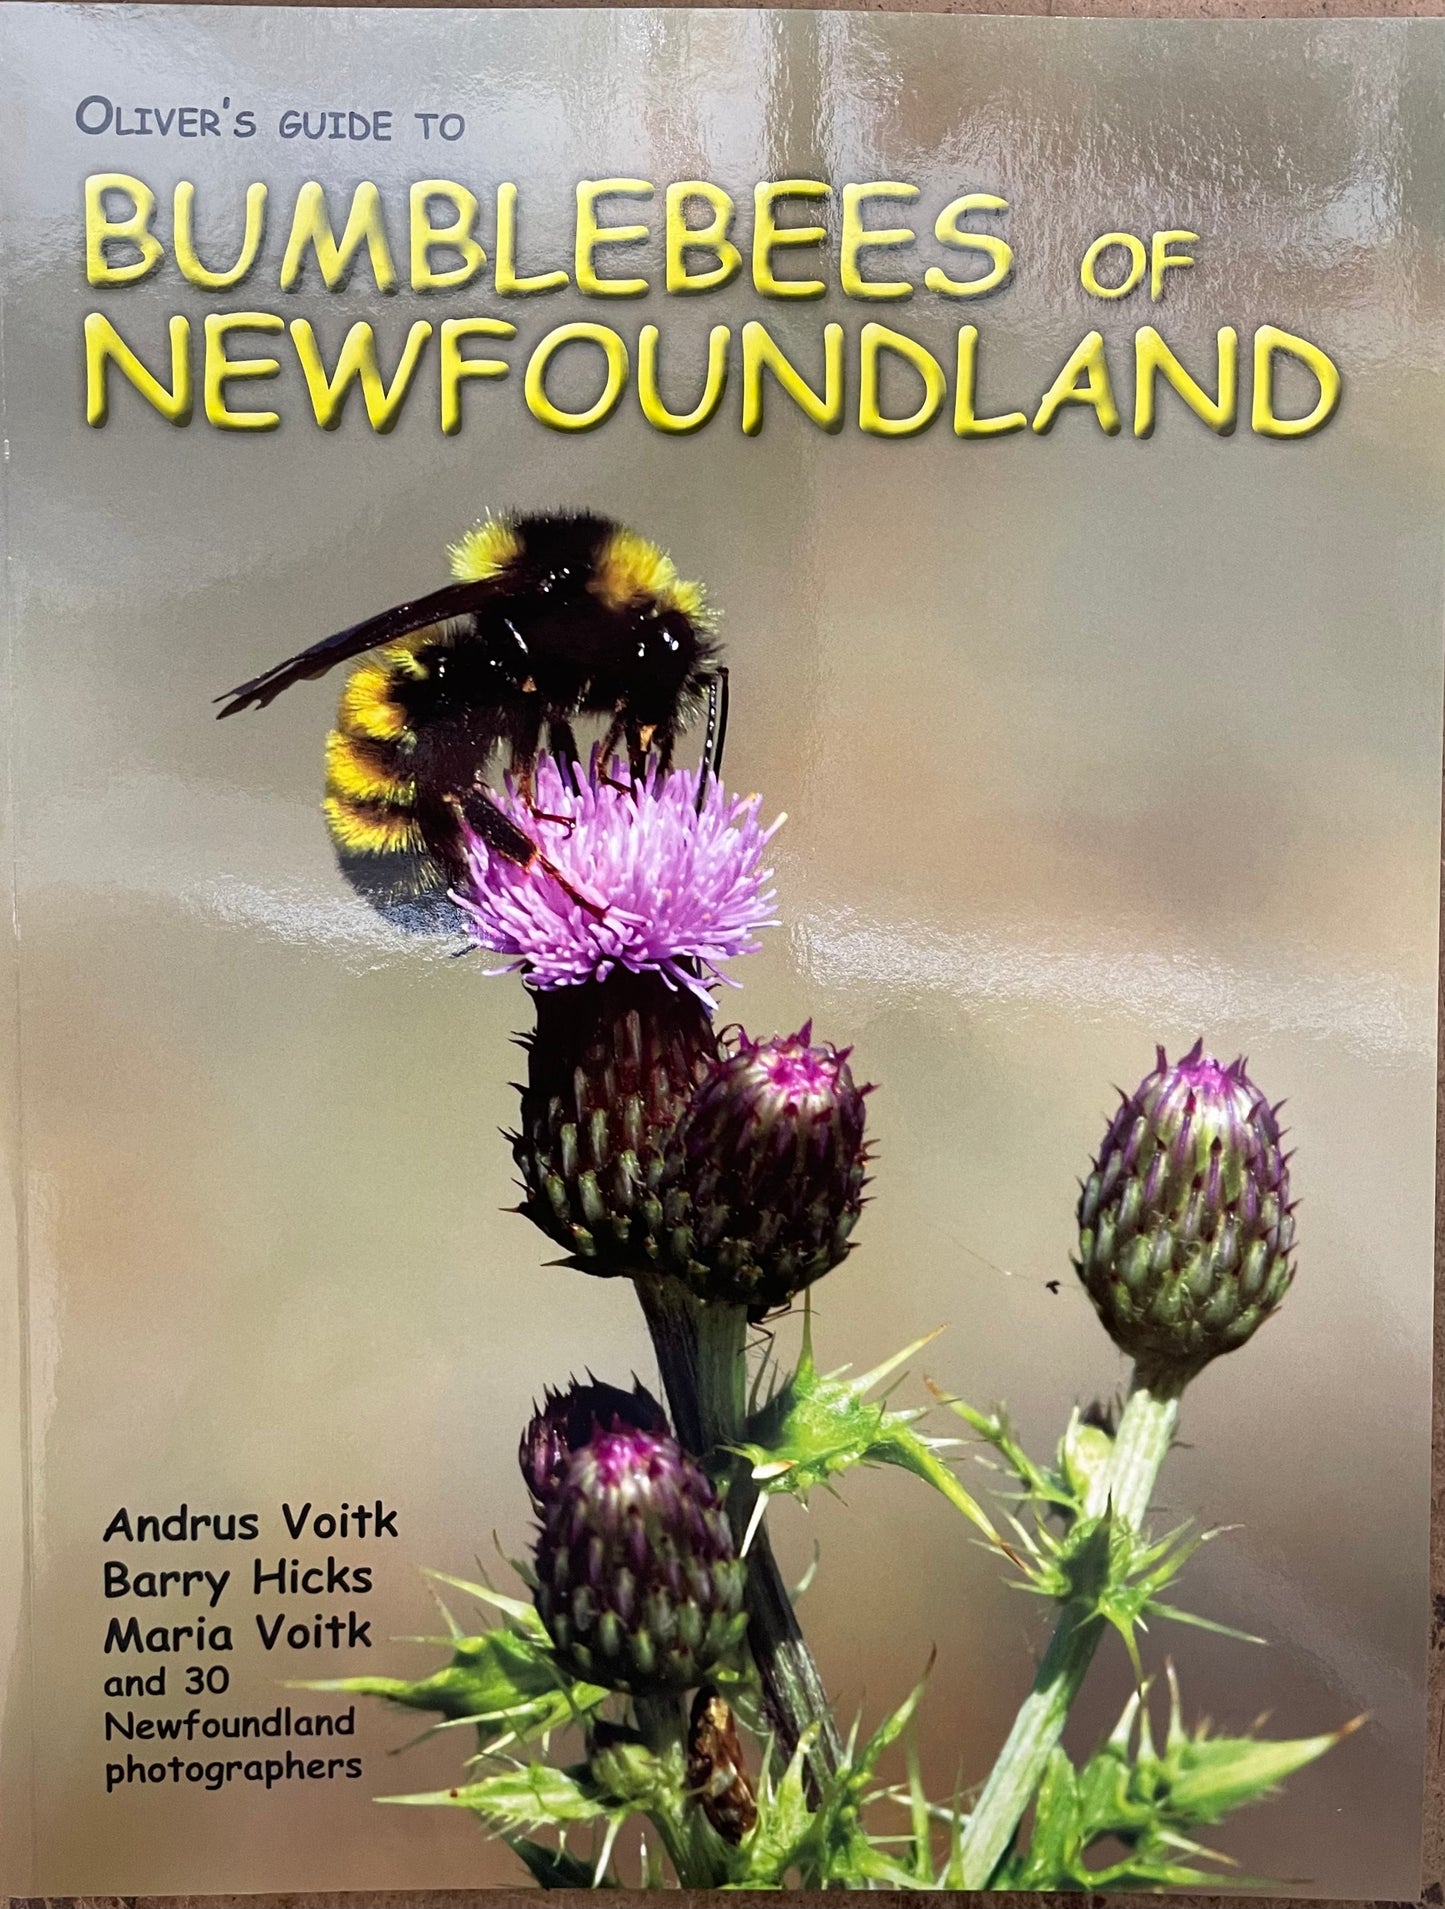 Bumblebees of Newfoundland by Andrus & Maria Voitk and Barry Hicks